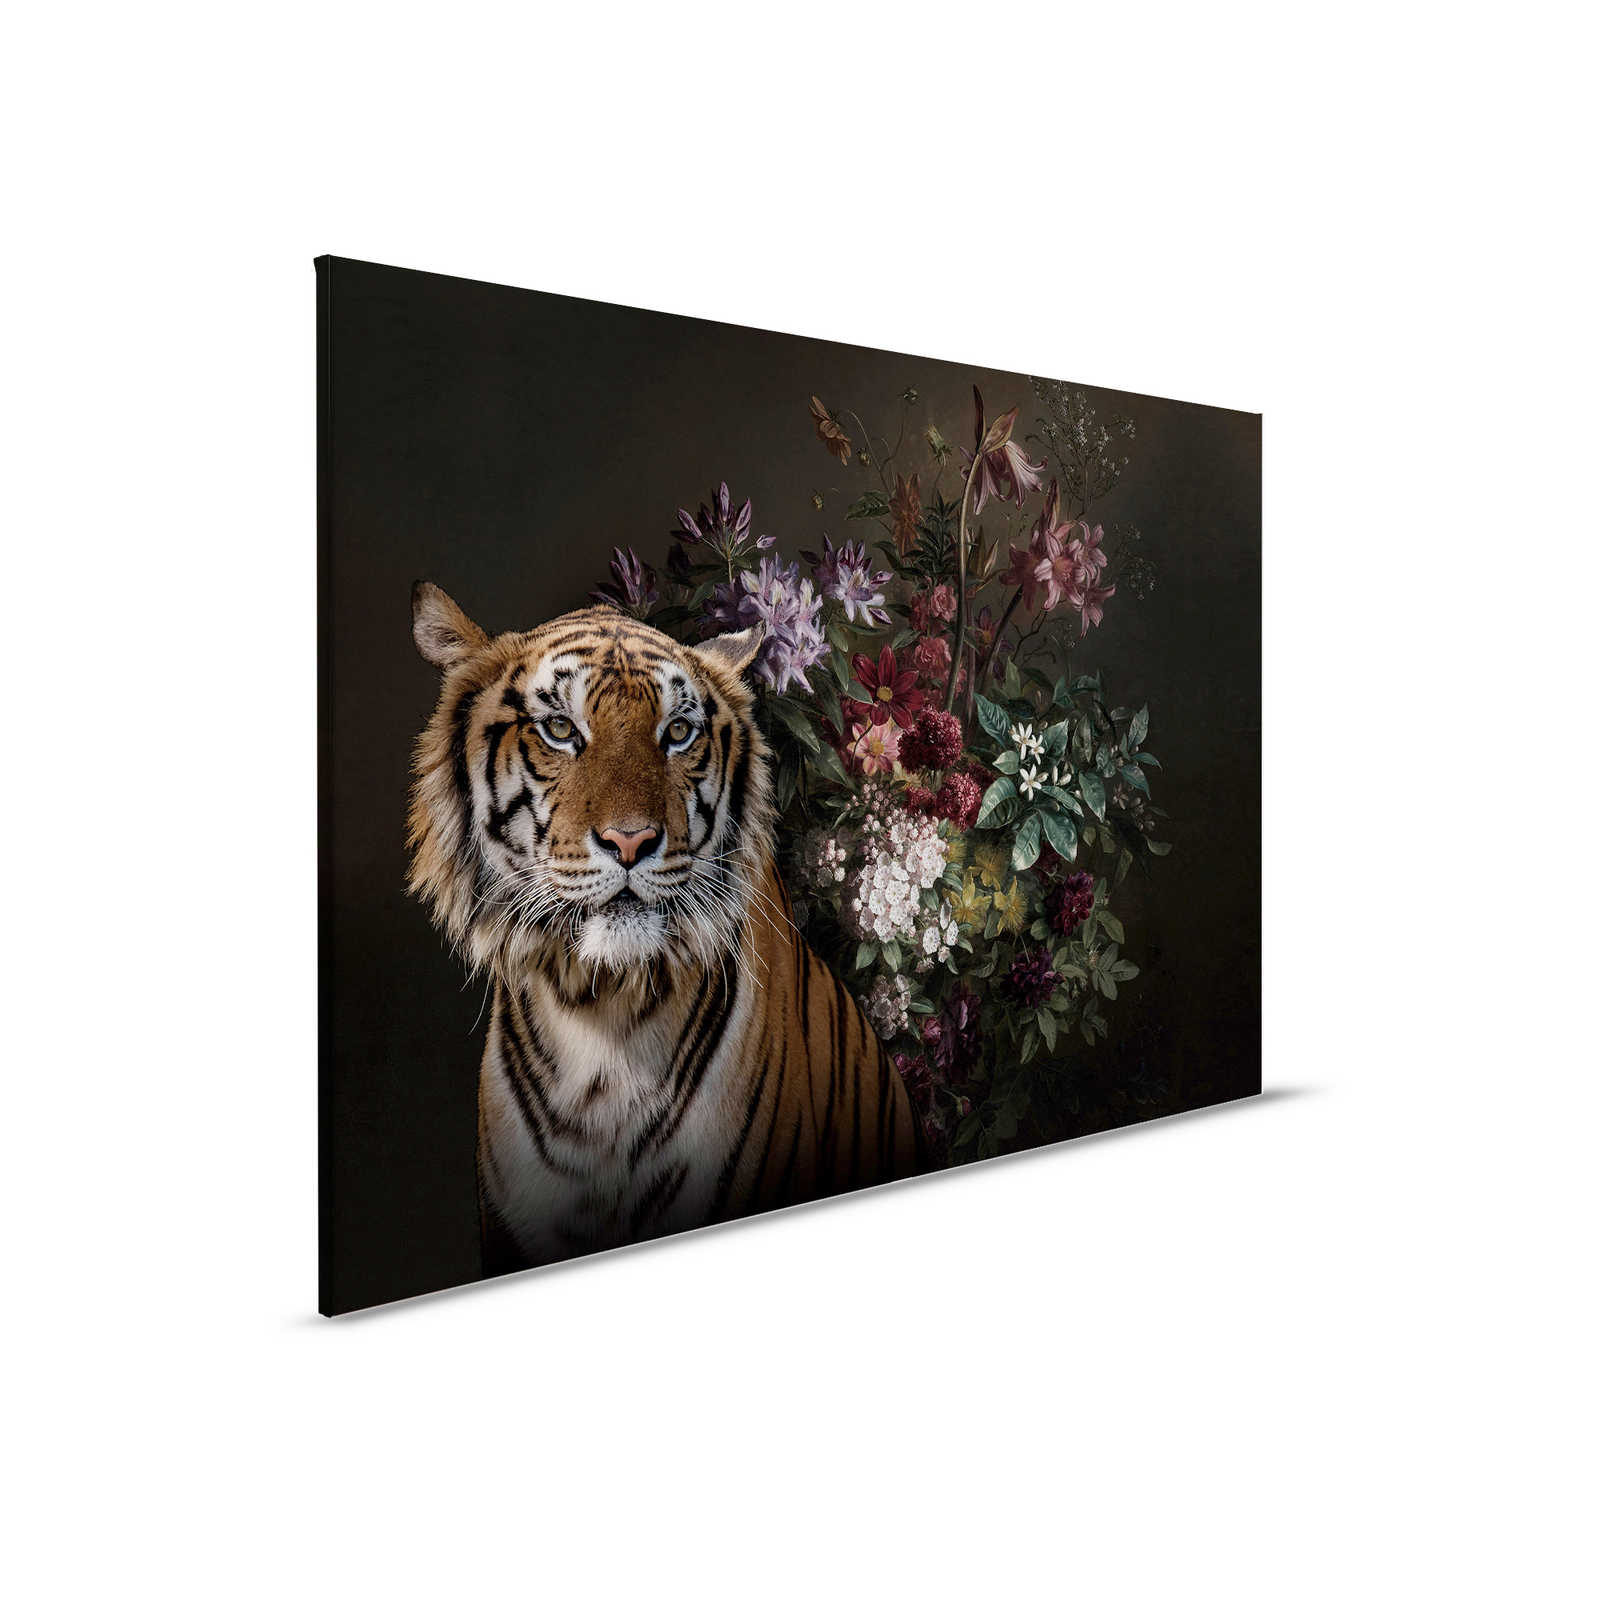 Canvas painting Tiger Portrait with Flowers - 0,90 m x 0,60 m
